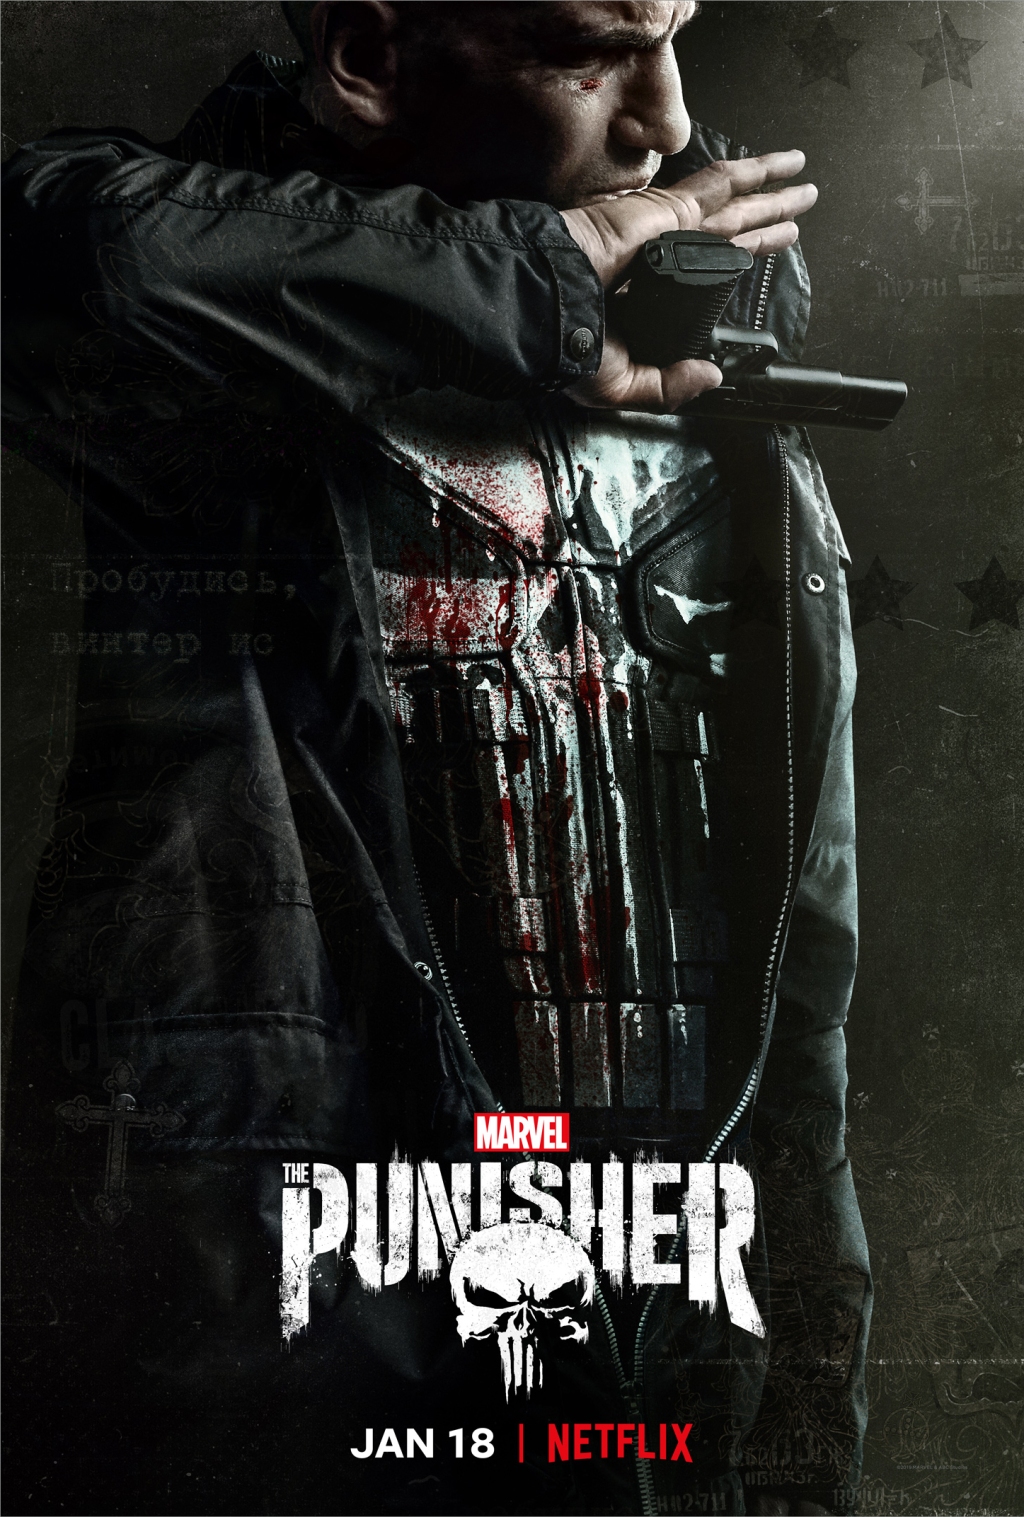 The Punisher (2017) - Mic Wright joins Tim Worthington for a chat about Frank Castle taking out the corrupt in authority and society and knocking over a few bins along the way in It's Good, Except It Sucks.